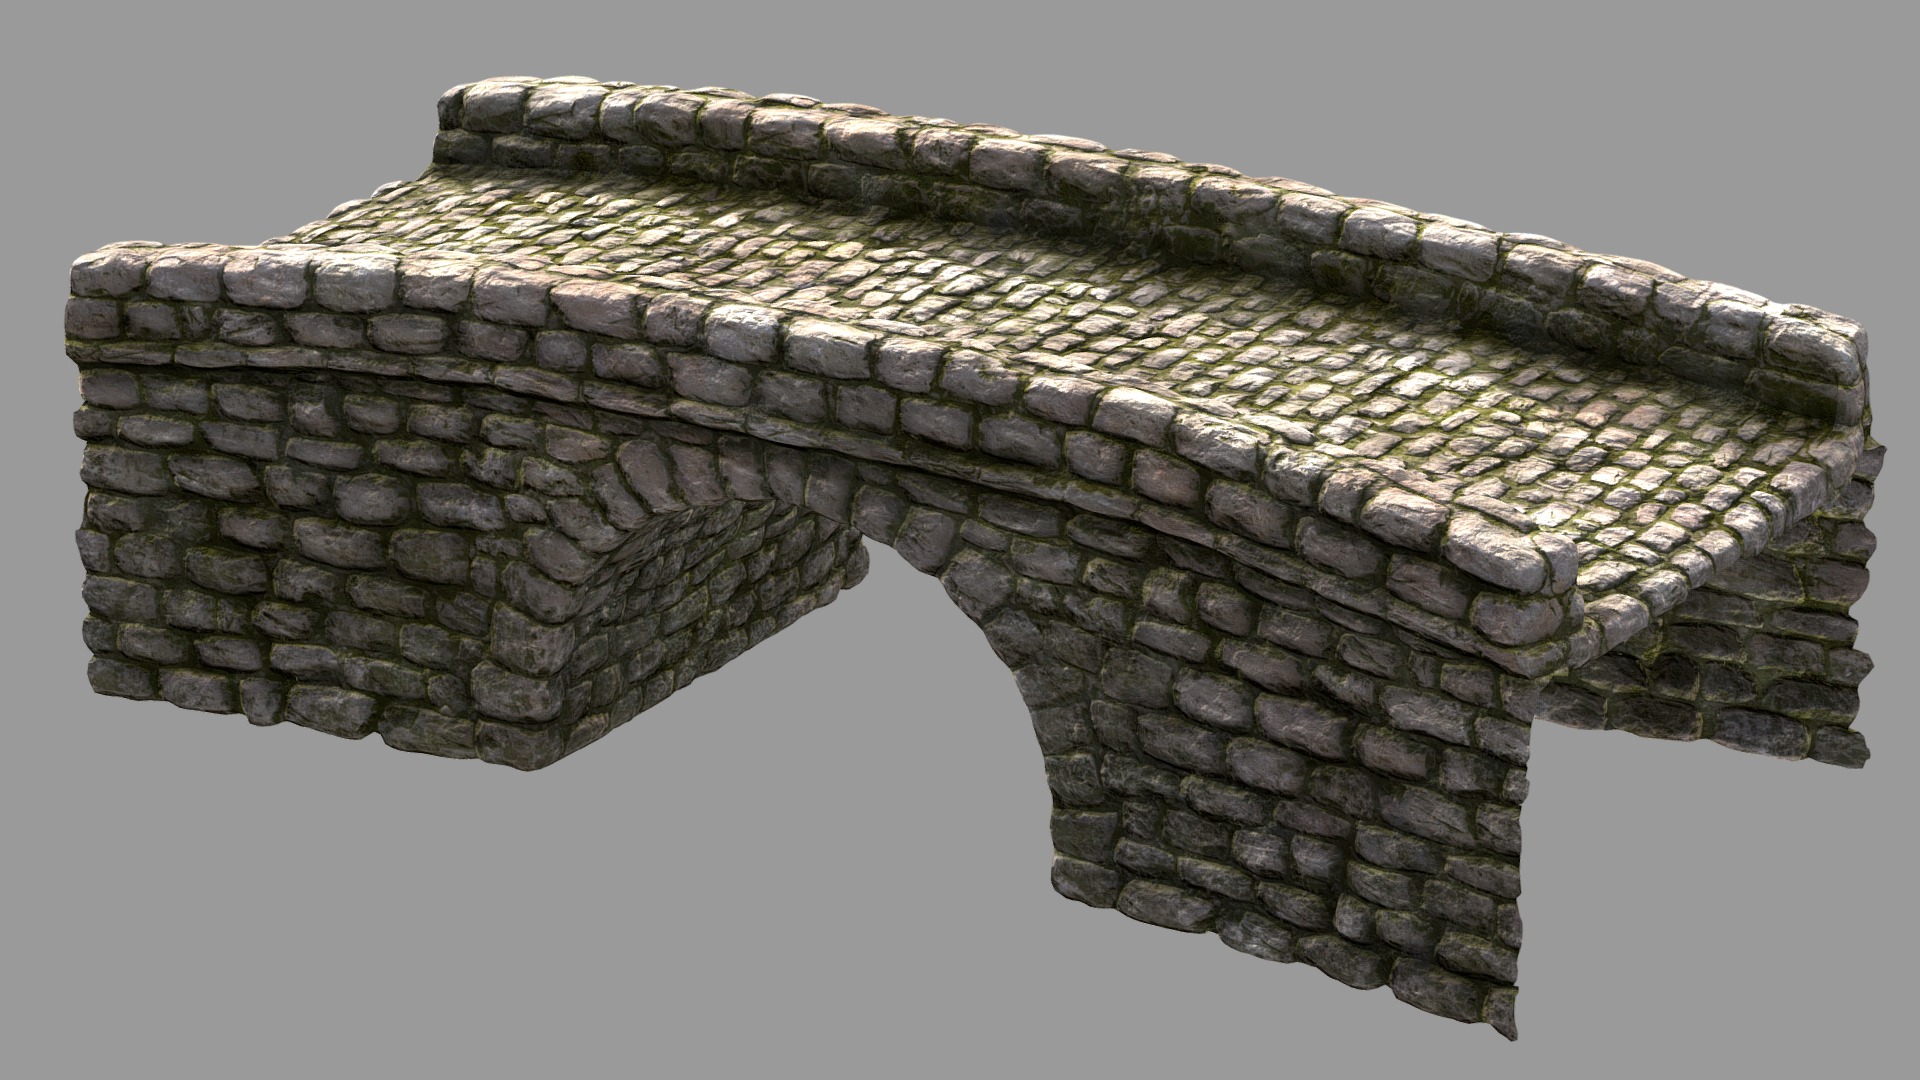 3D model Creek Bridge - This is a 3D model of the Creek Bridge. The 3D model is about a stone wall with a stone arch.